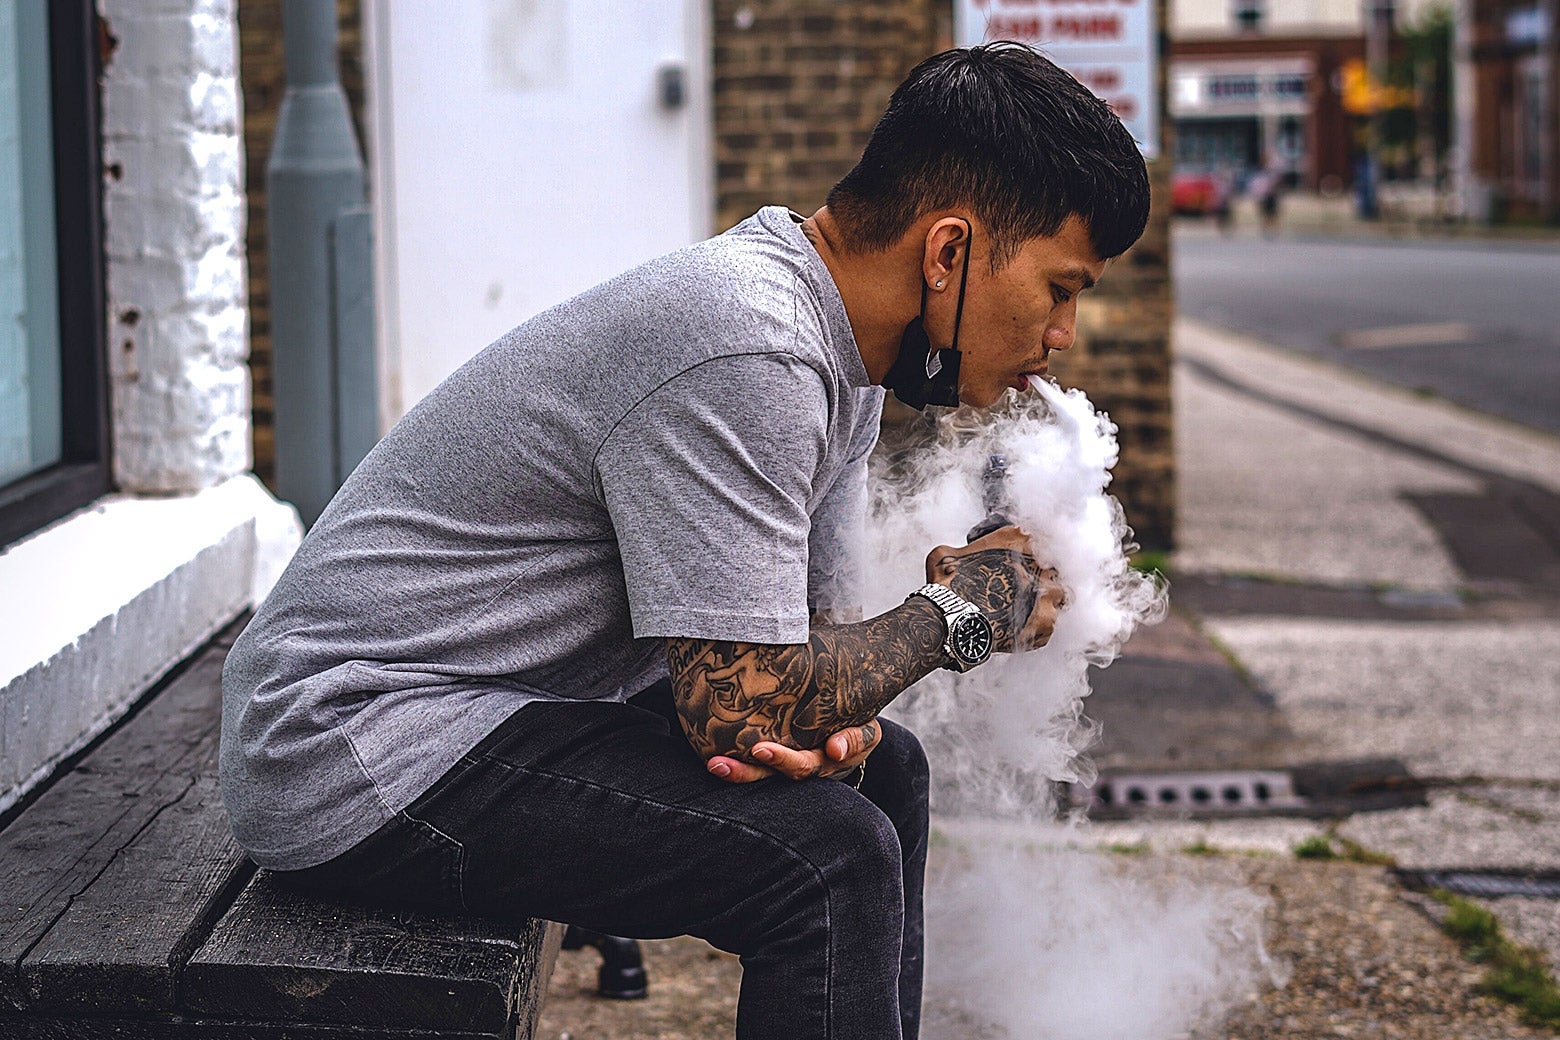 A man sitting on a bench hunched over and blowing out a thick cloud of vape smoke.